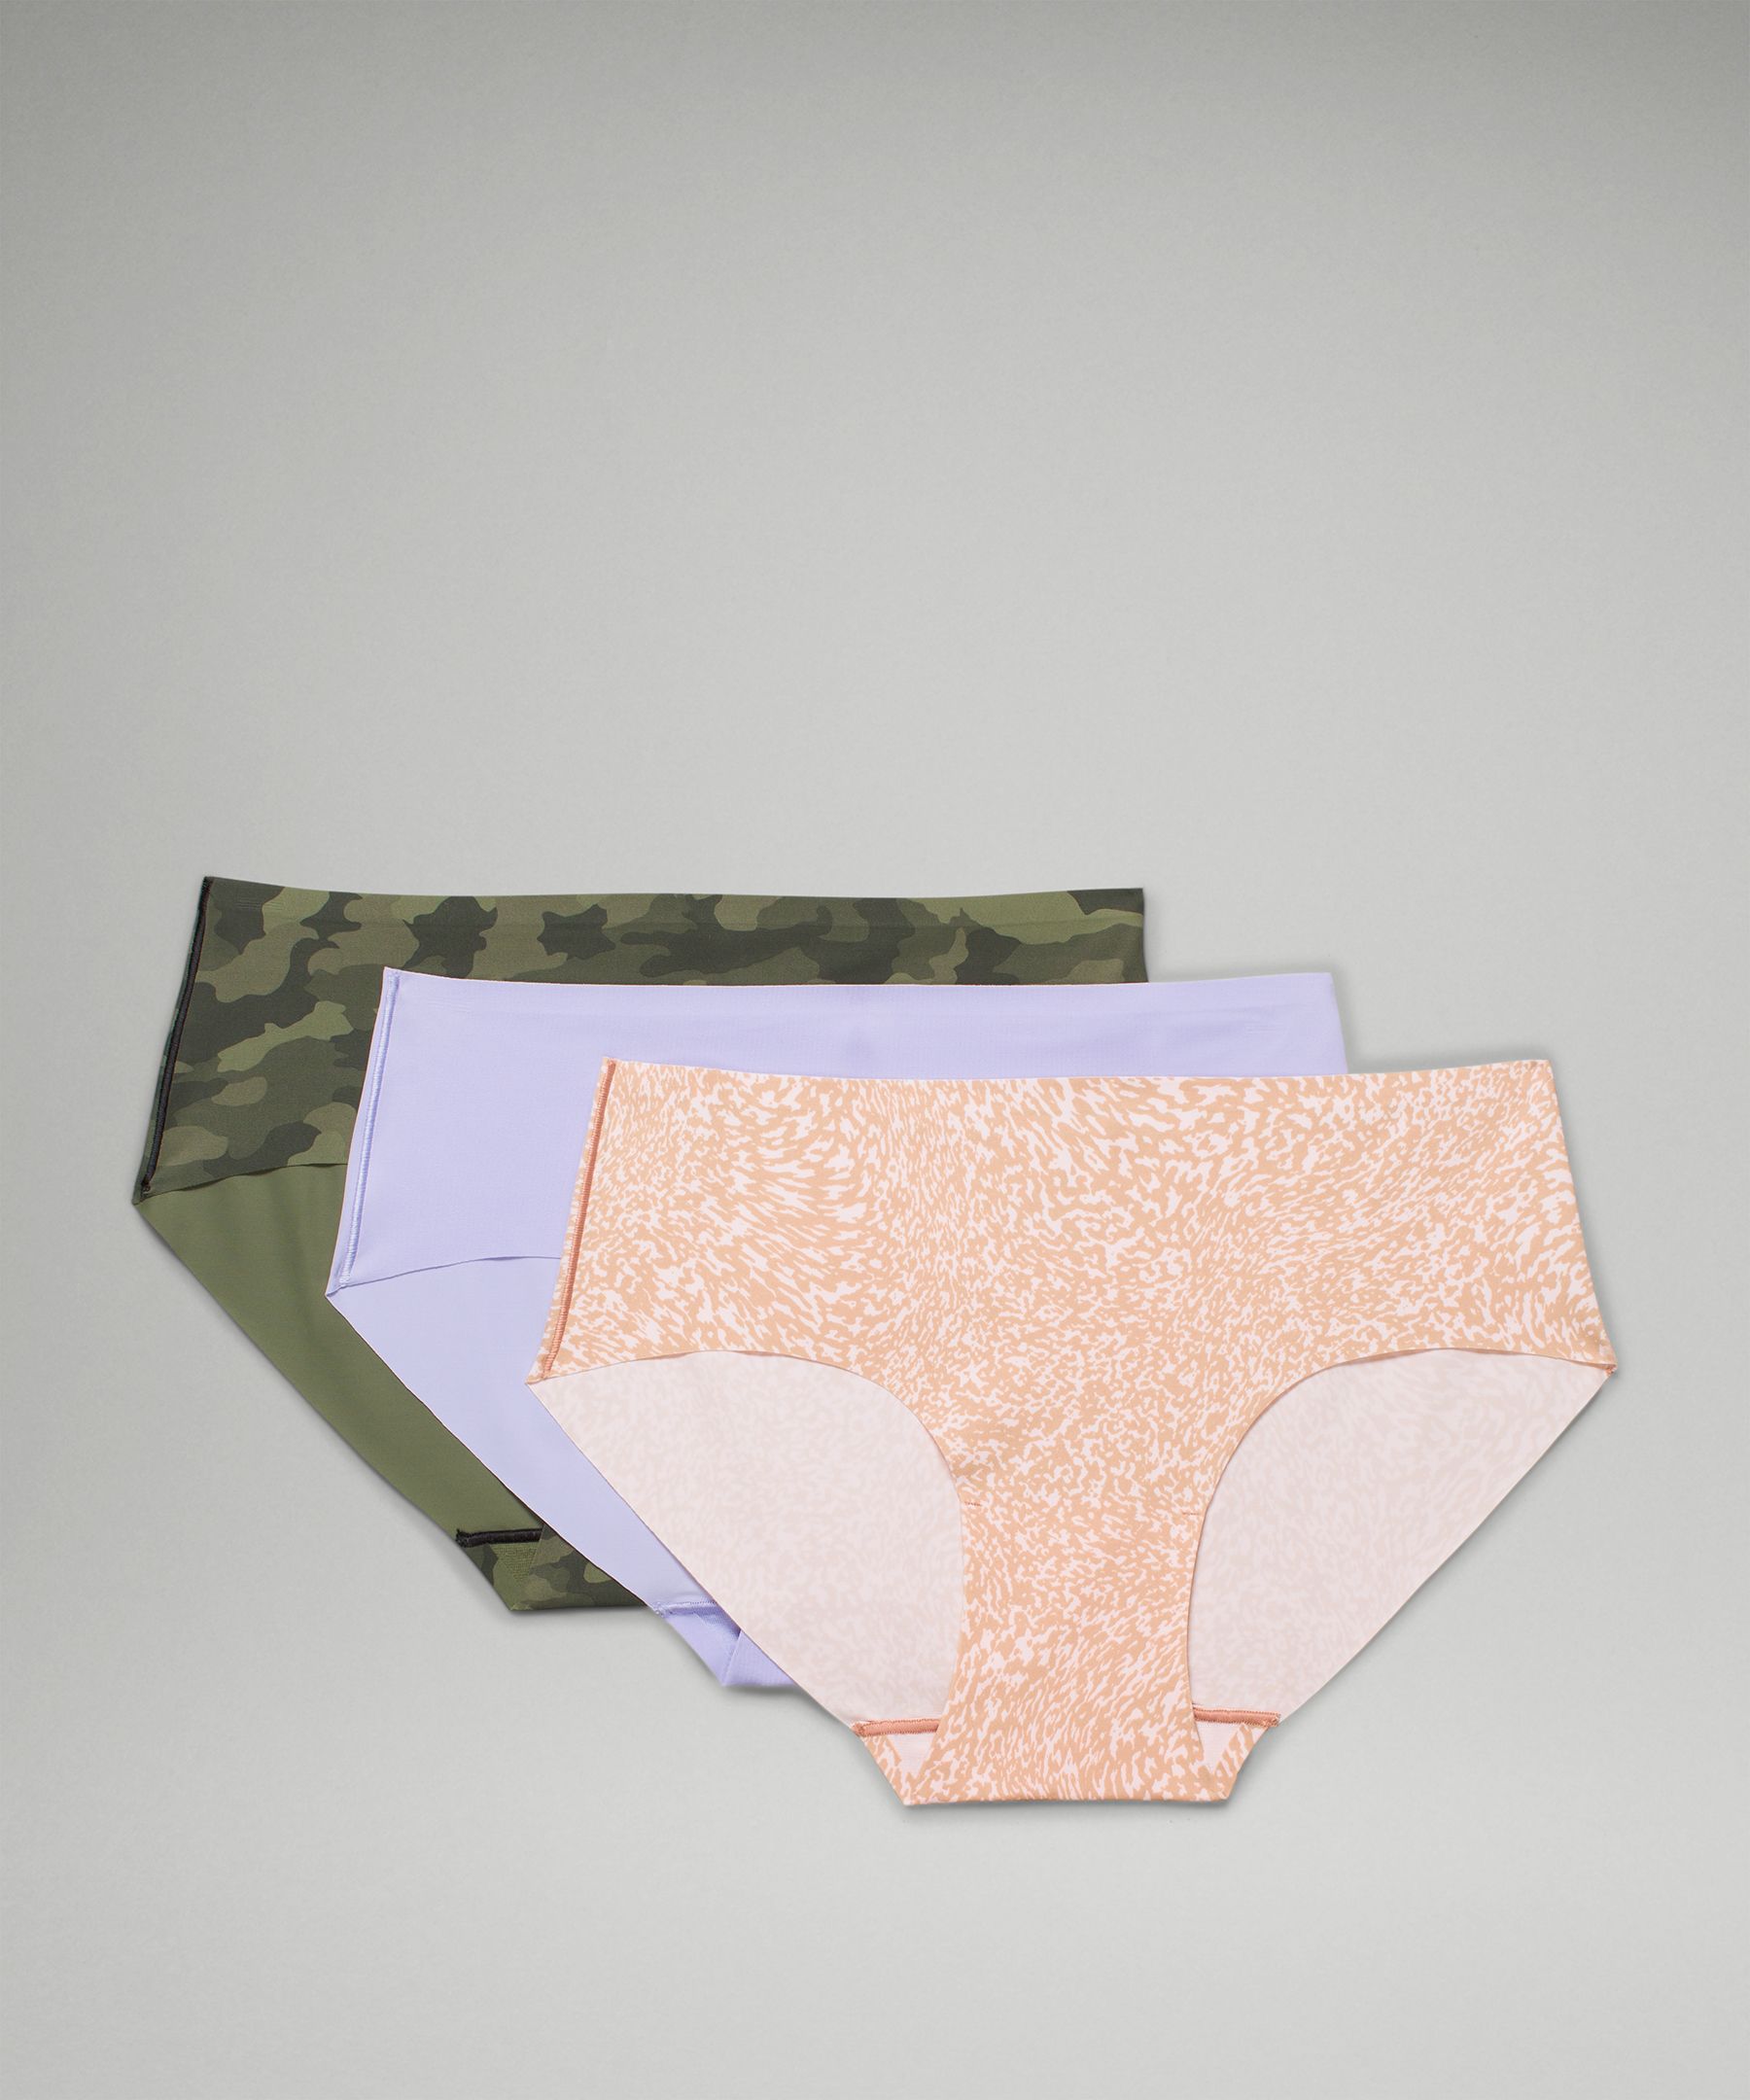 Intimates Panty, InvisiLite Hipster for Women at